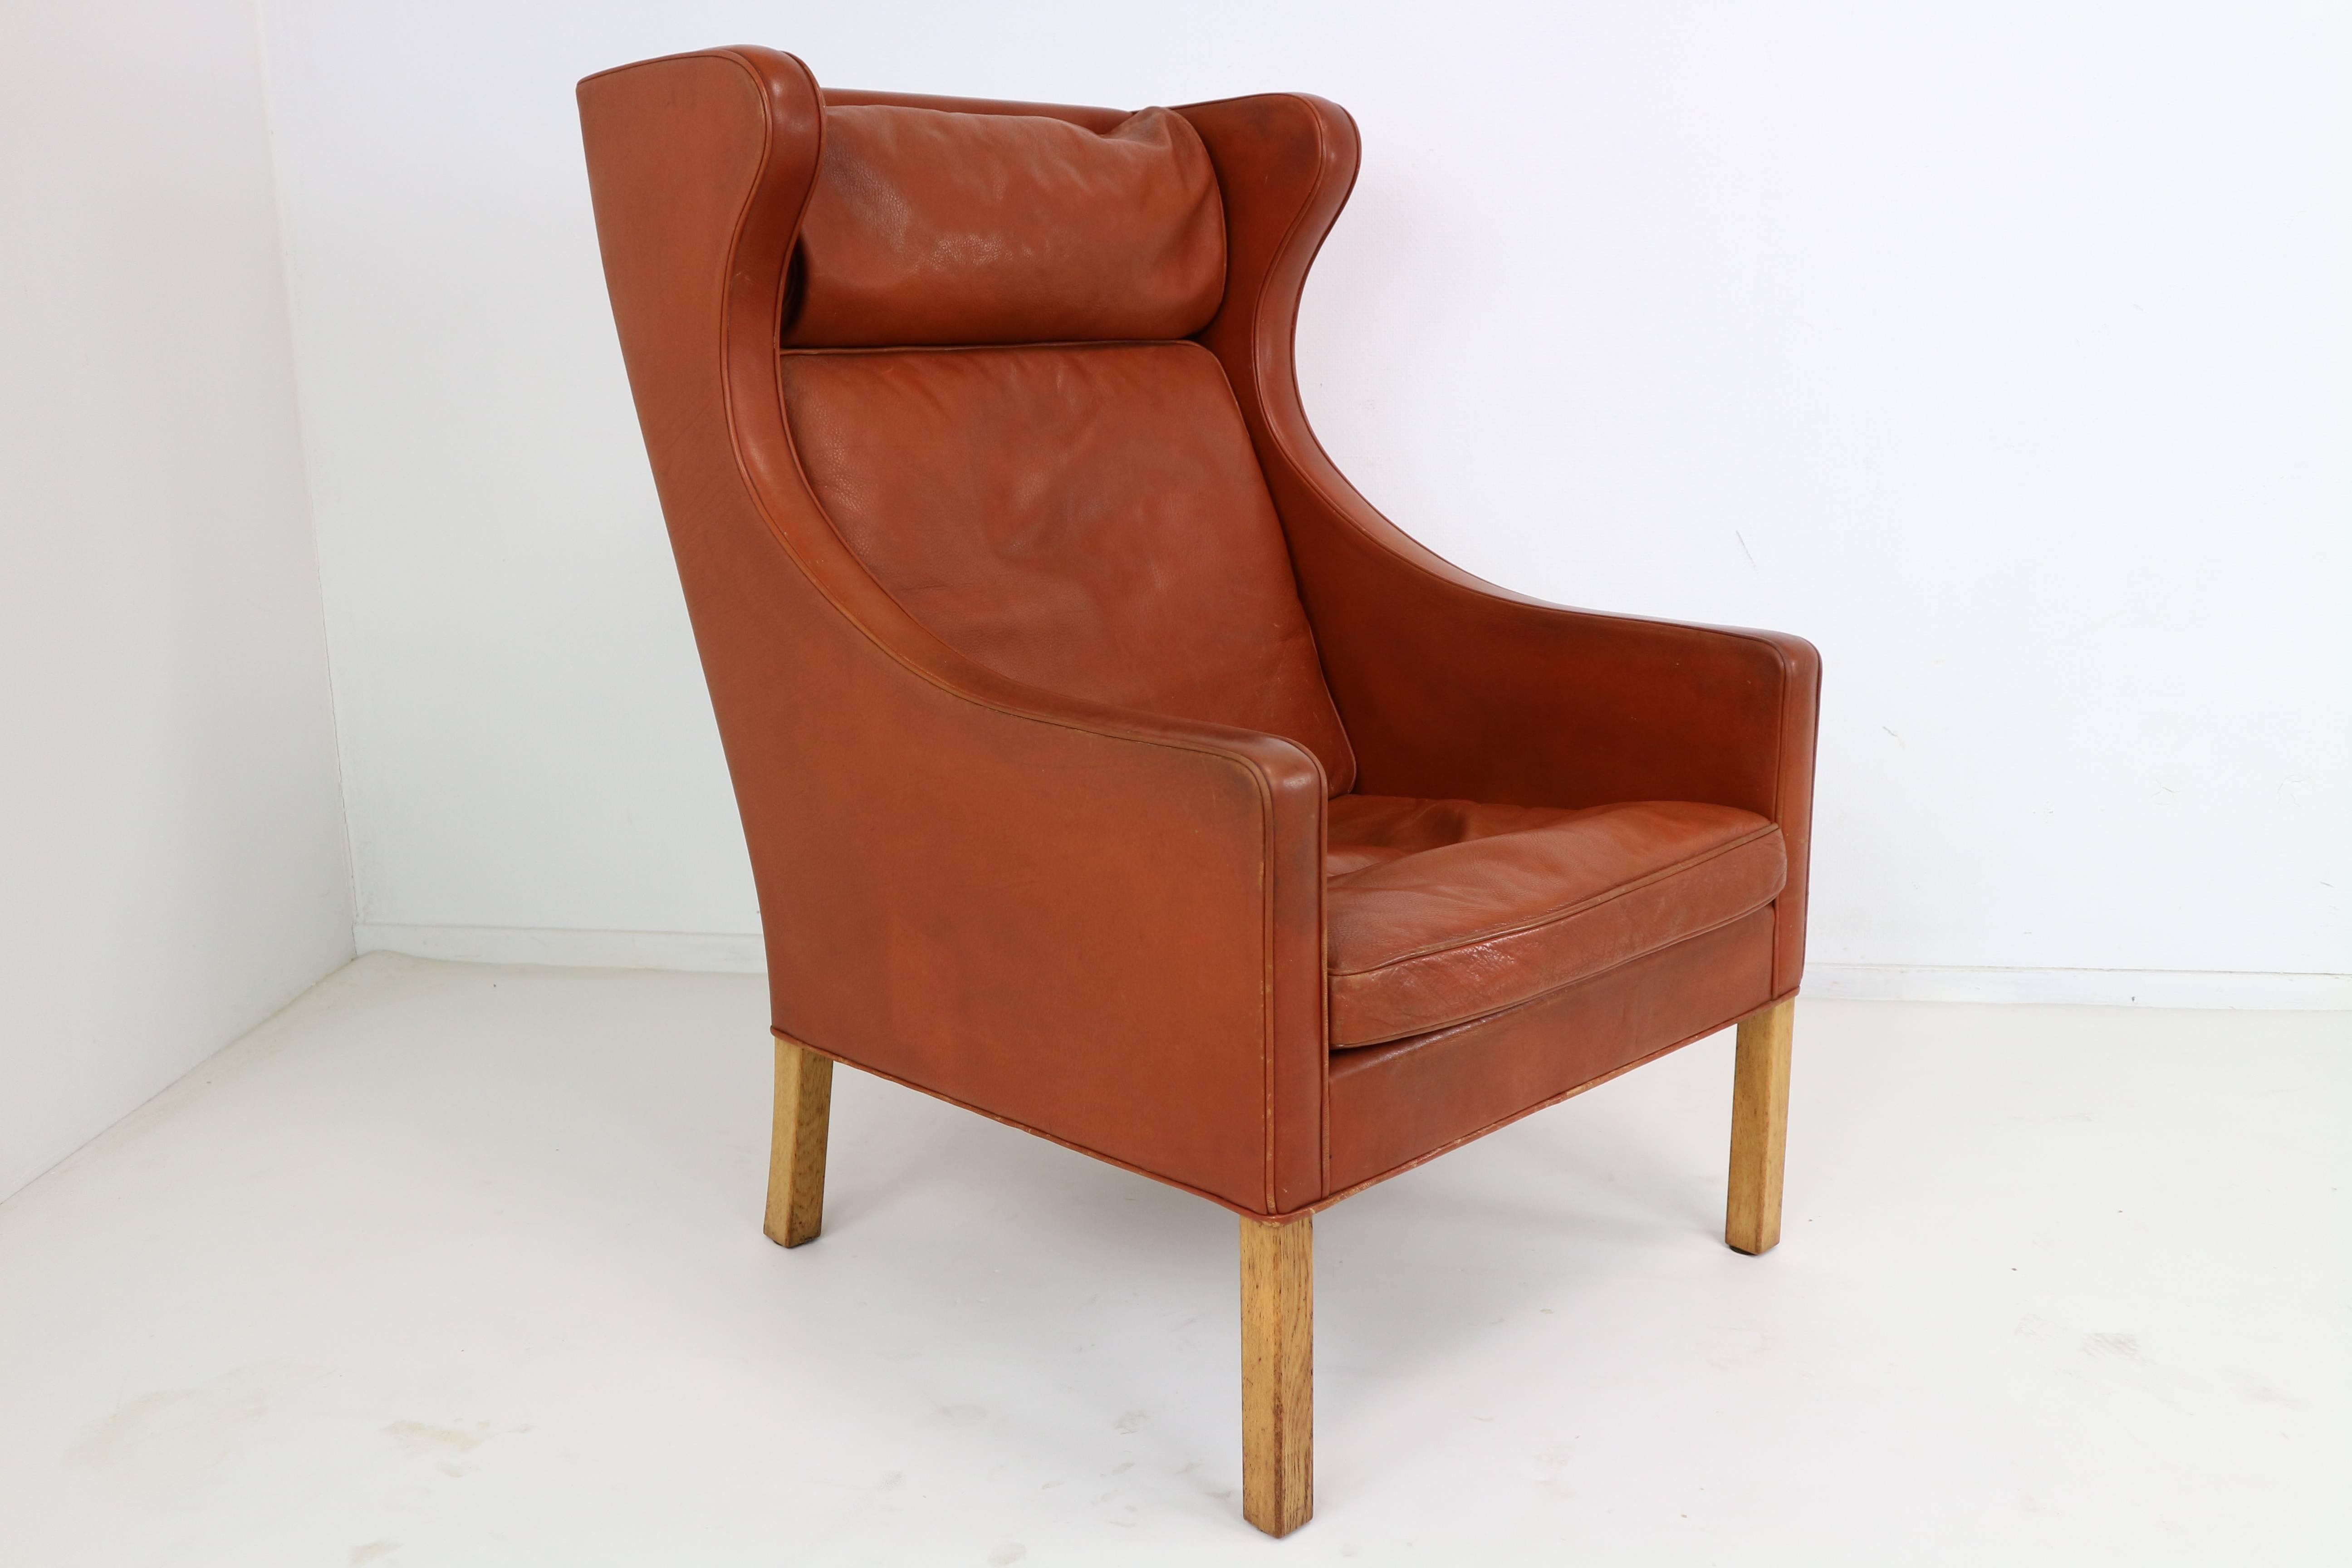 Model 2204. Designed in 1963, this simple yet stately design draws on the curved and arched elements of Kaare Klint’s sofas from the 1920s. The understated and elegant curvaceous design is effective in making the sitter enclosed by the wings and the